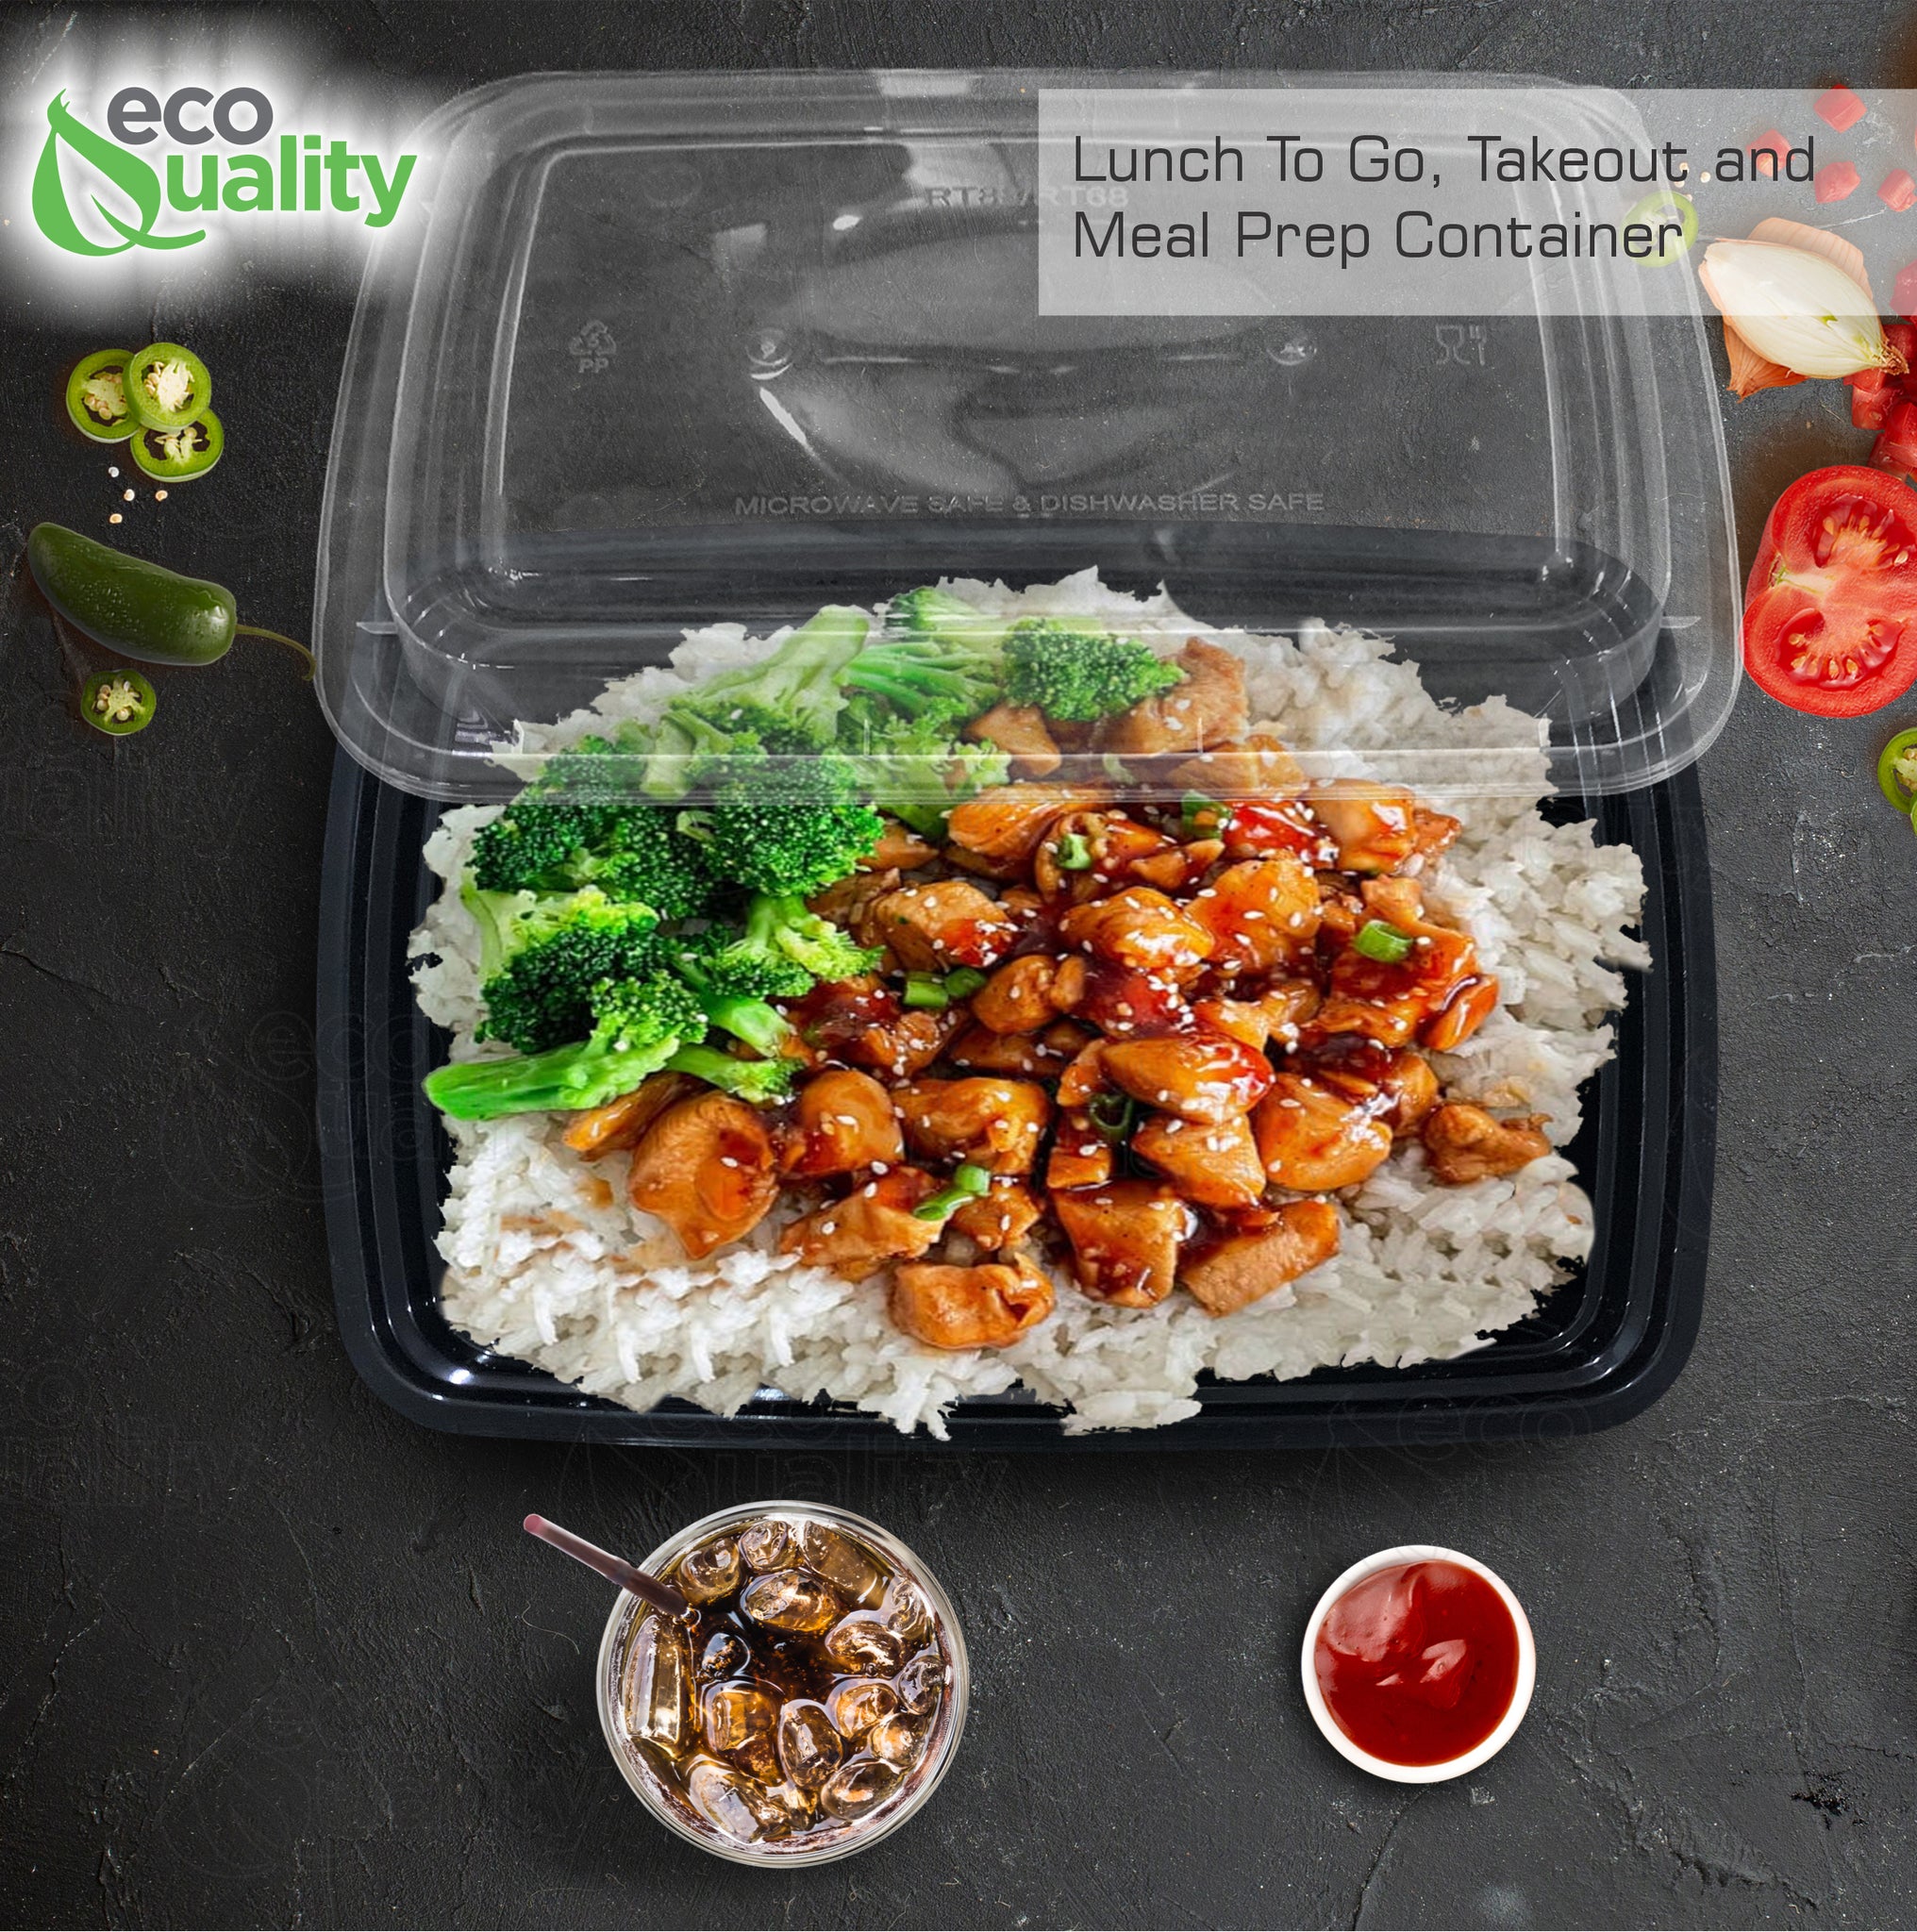 to-go boxes takeout delivery take out food storage containers Reusable Box Plastic Microwave Freezer White safe meal prep Lunch food storage solutions packaging Ecofriendly Disposable with lid black 32 oz 32 ounces economical bulk wholesale ecoquality restaurant fast food supplies nyc